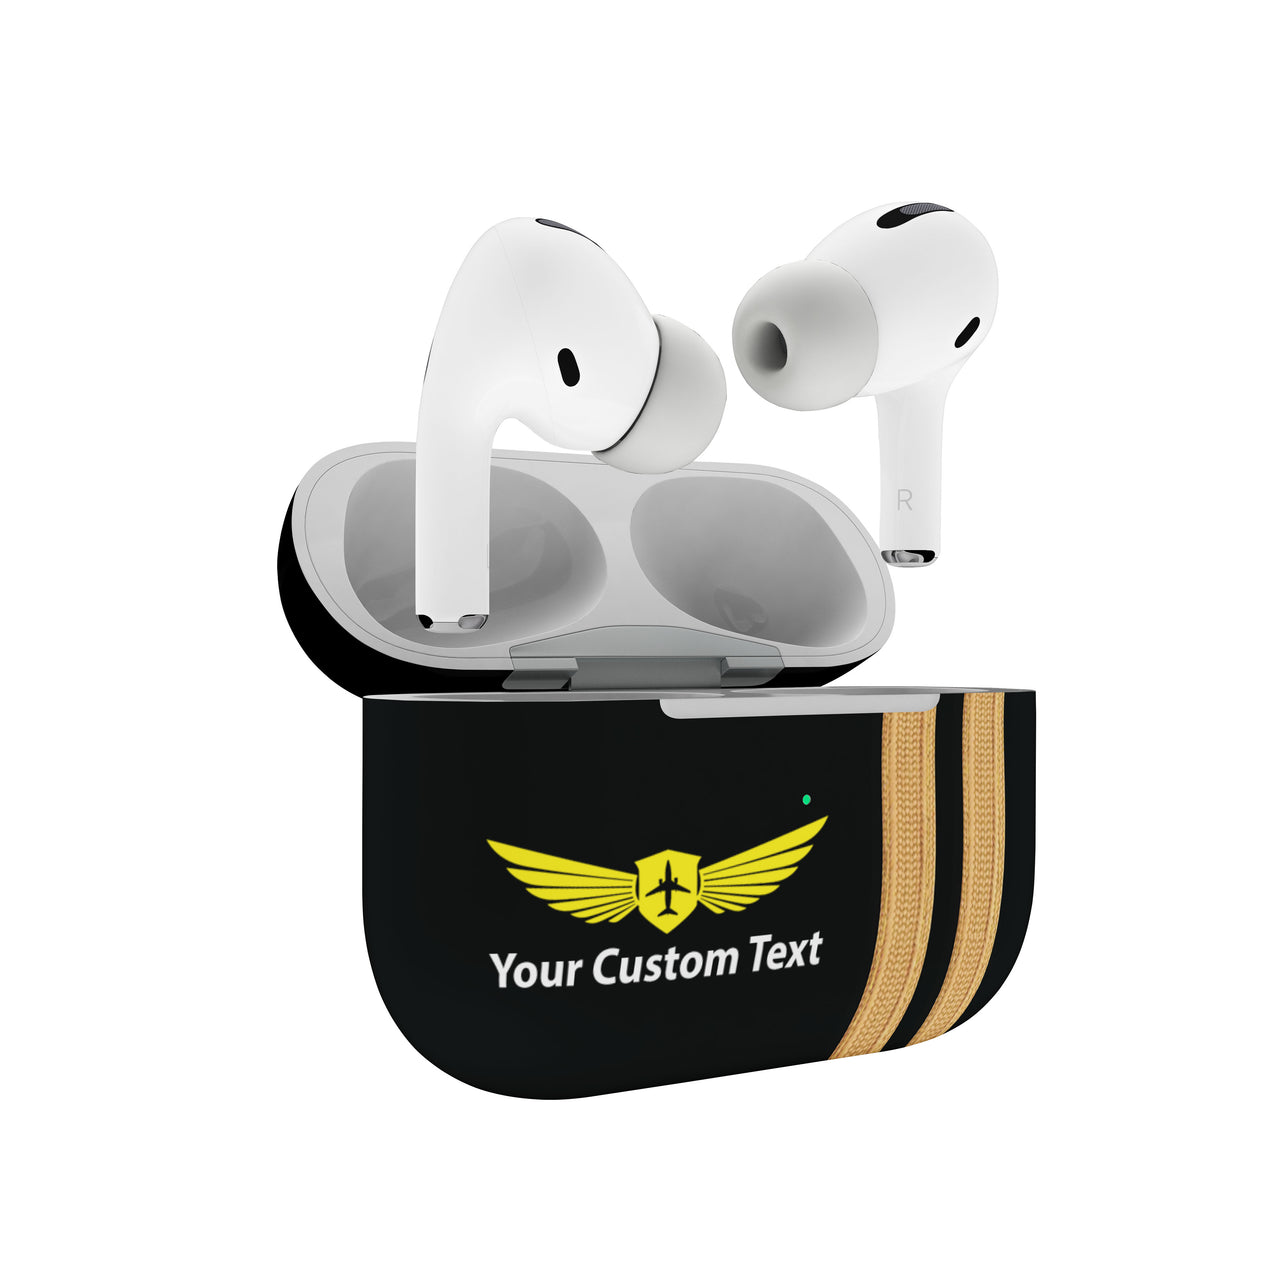 Customizable Name & Special Golden Pilot Epaulettes Airpods "Pro" Cases